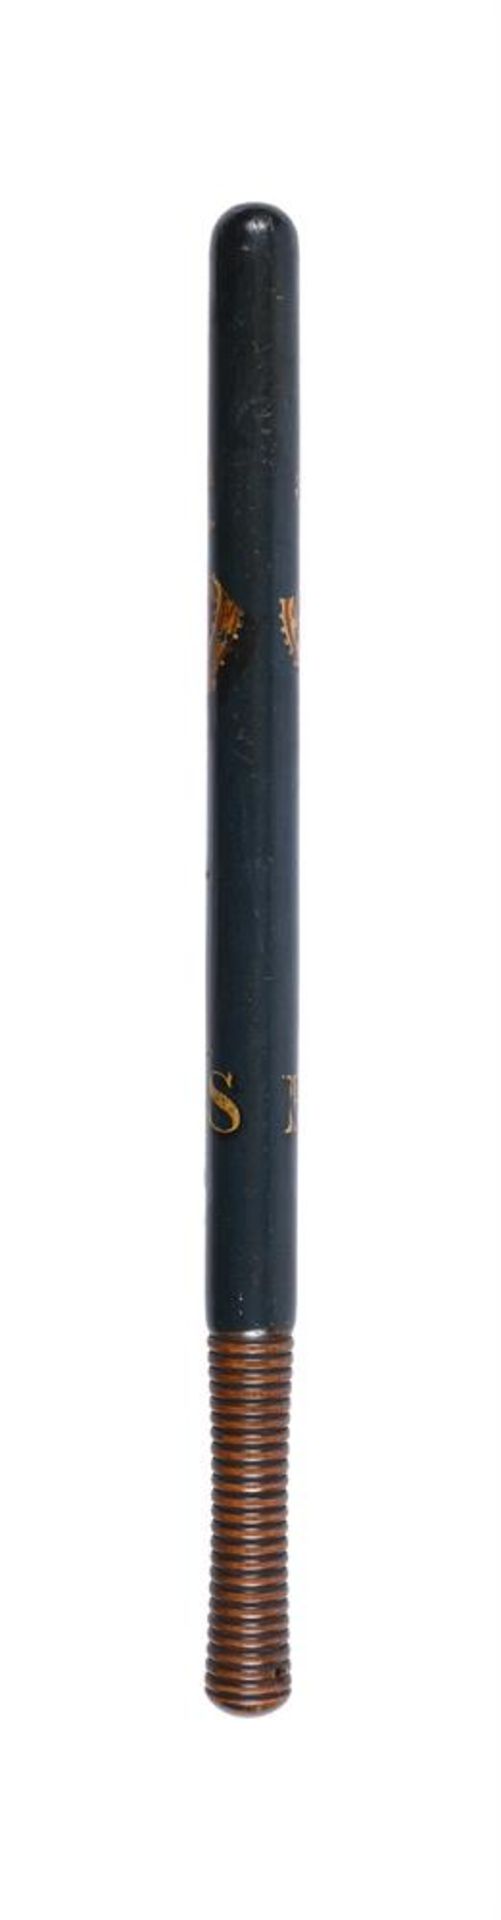 A GEORGE IV PAINTED WOOD TRUNCHEON - Image 2 of 2